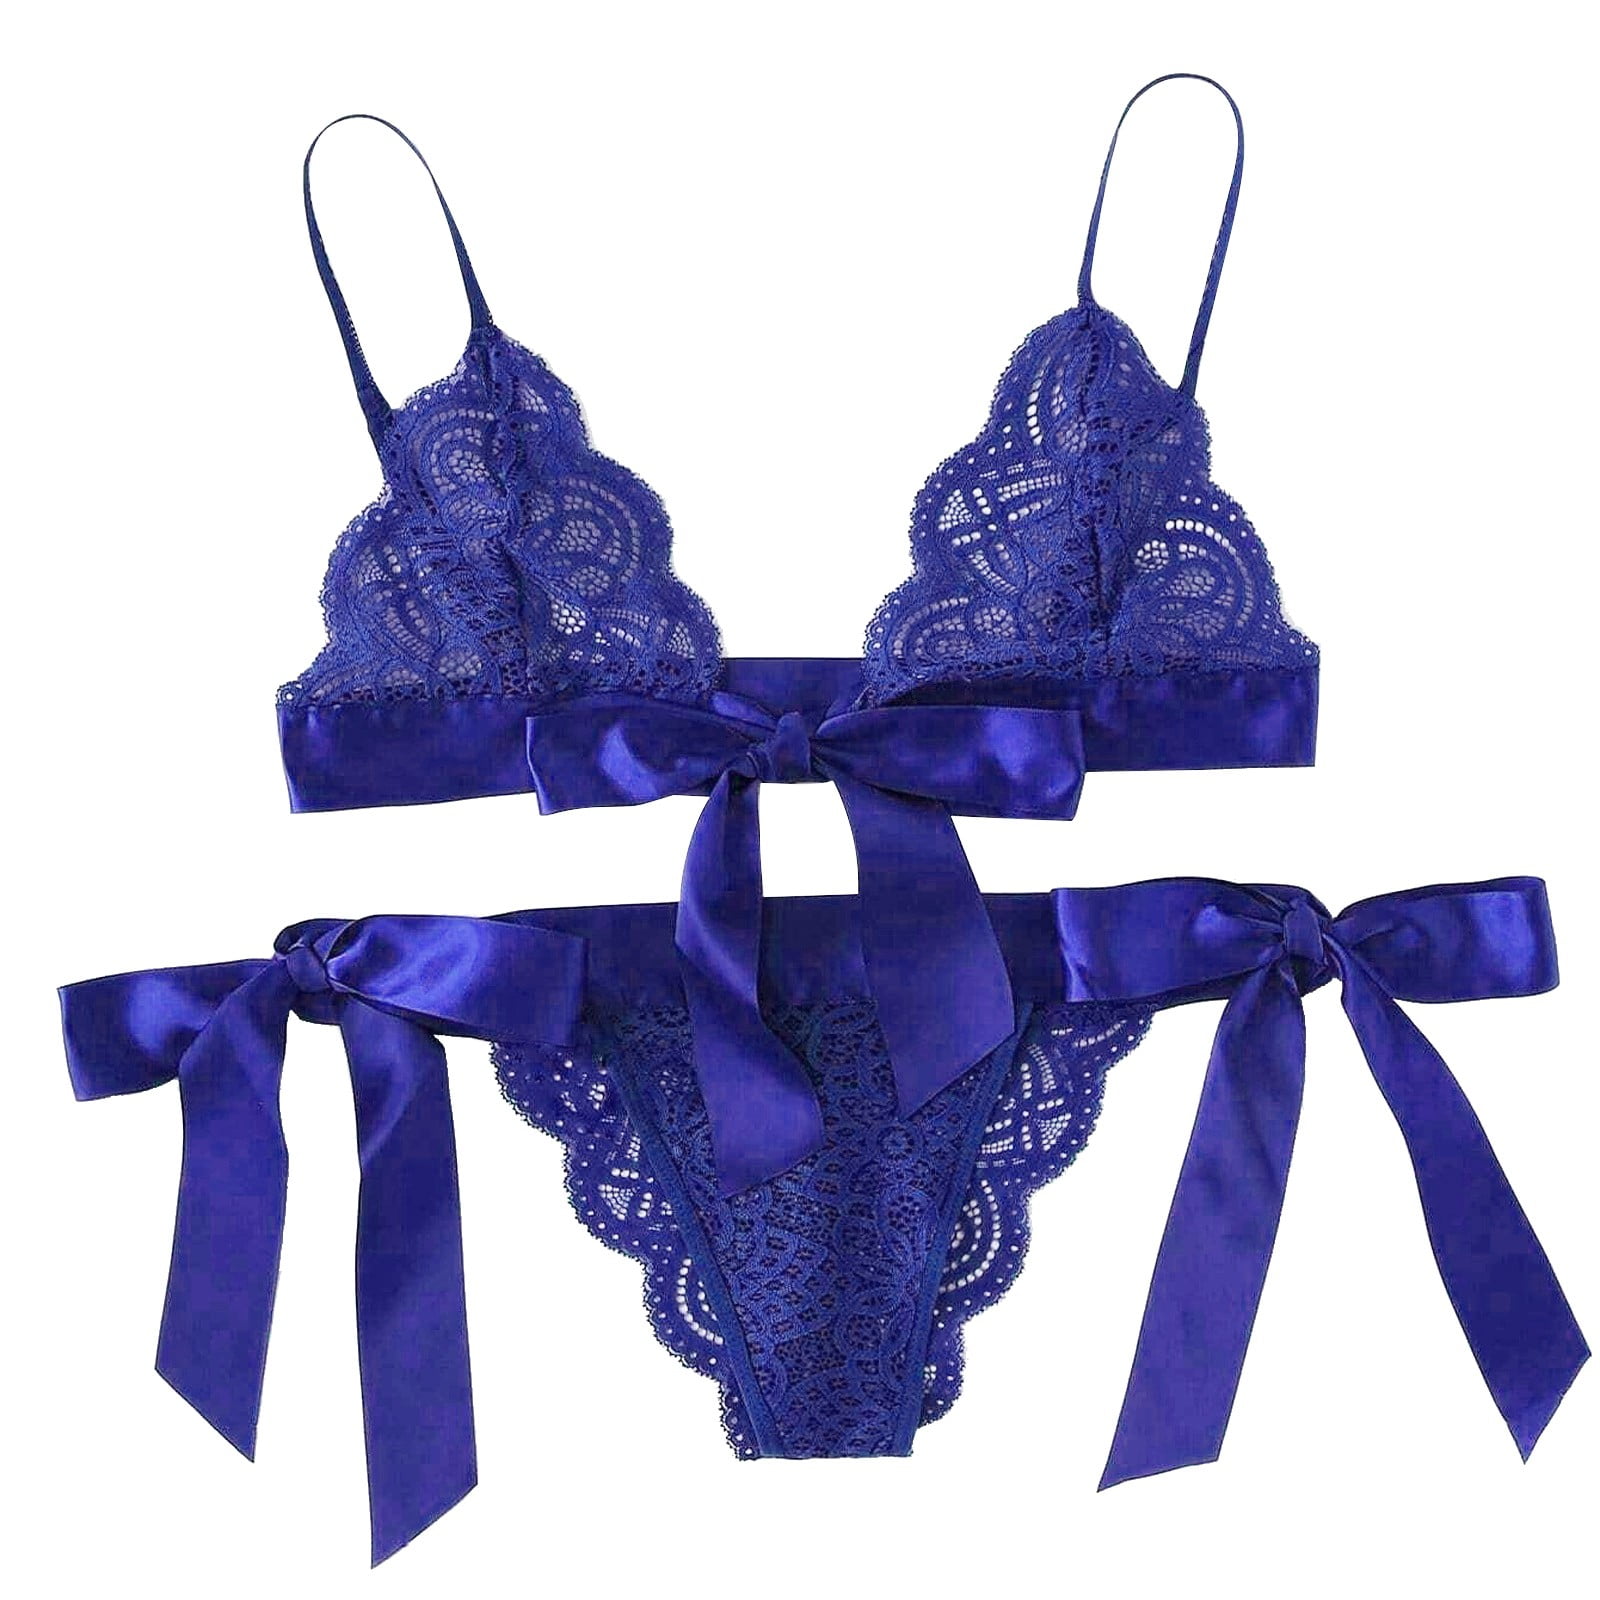 Ydkzymd Sexy Lingerie Set S Women Bra And Panty Sets With Underwire Floral Lace Lingerie Set 2